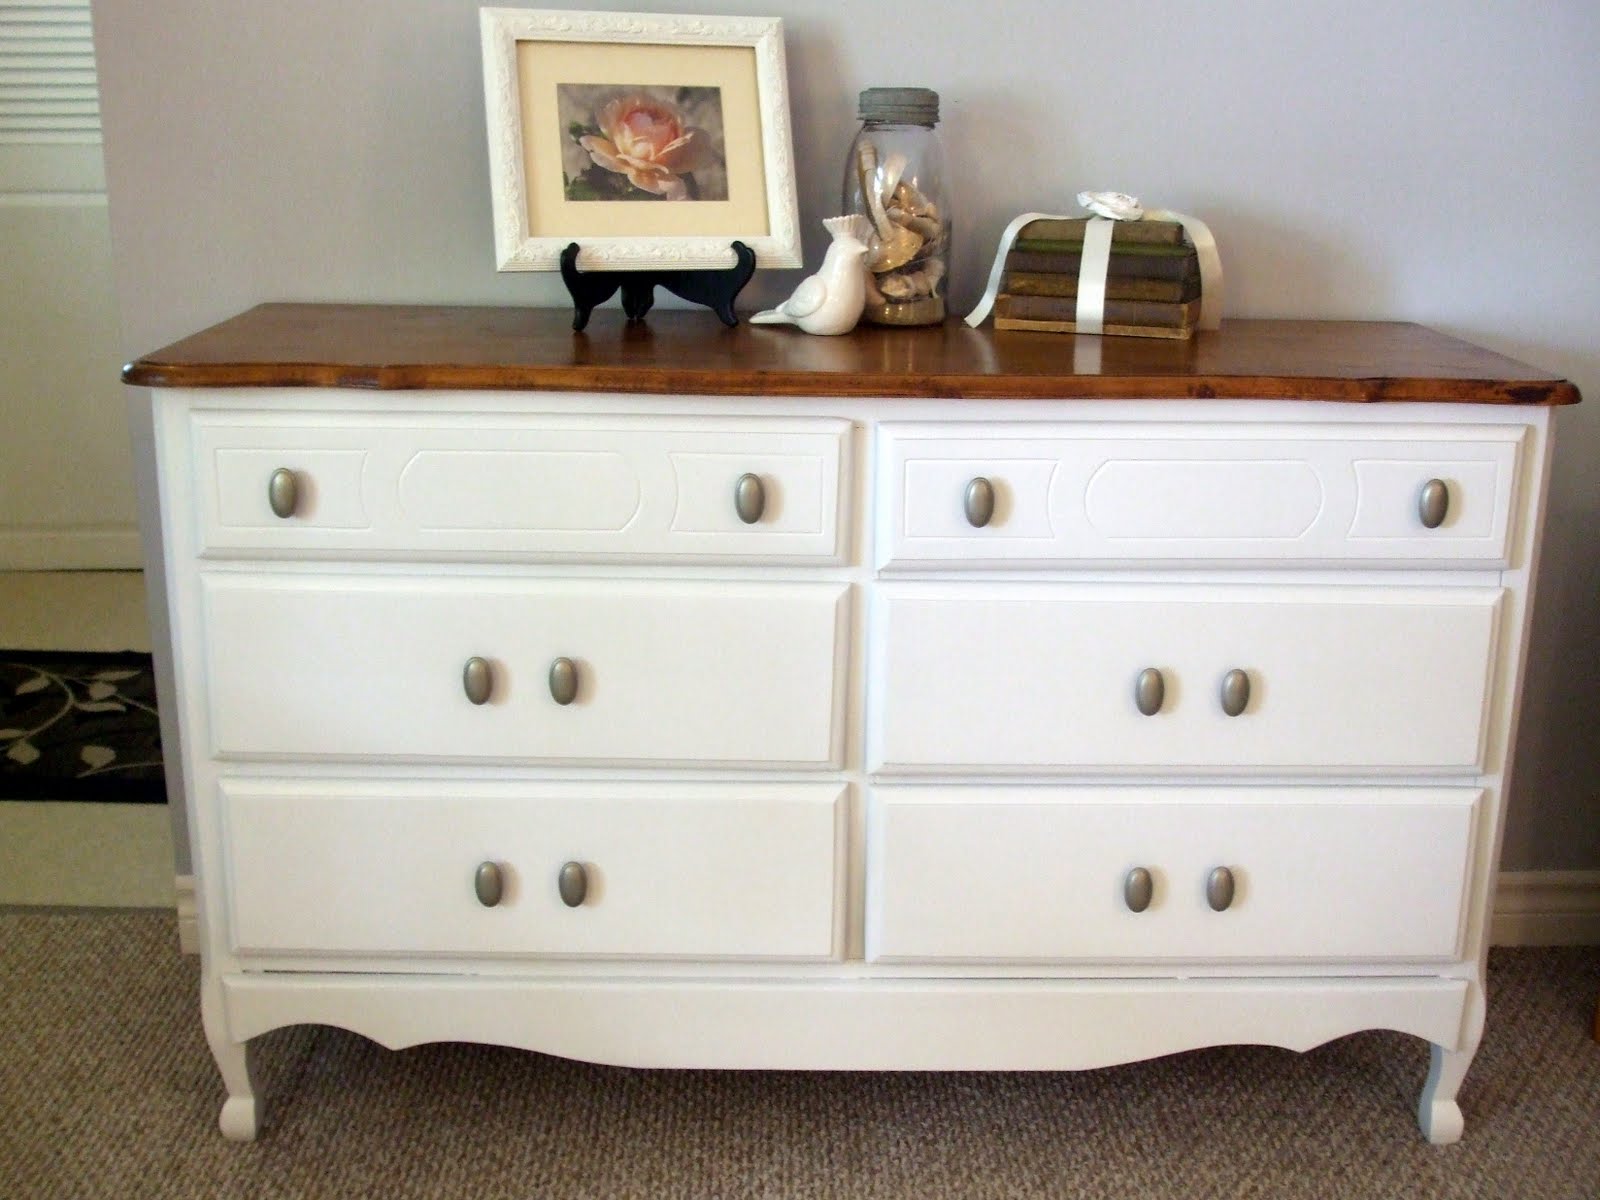 Simply Chic Treasures Pine Dresser Makeover